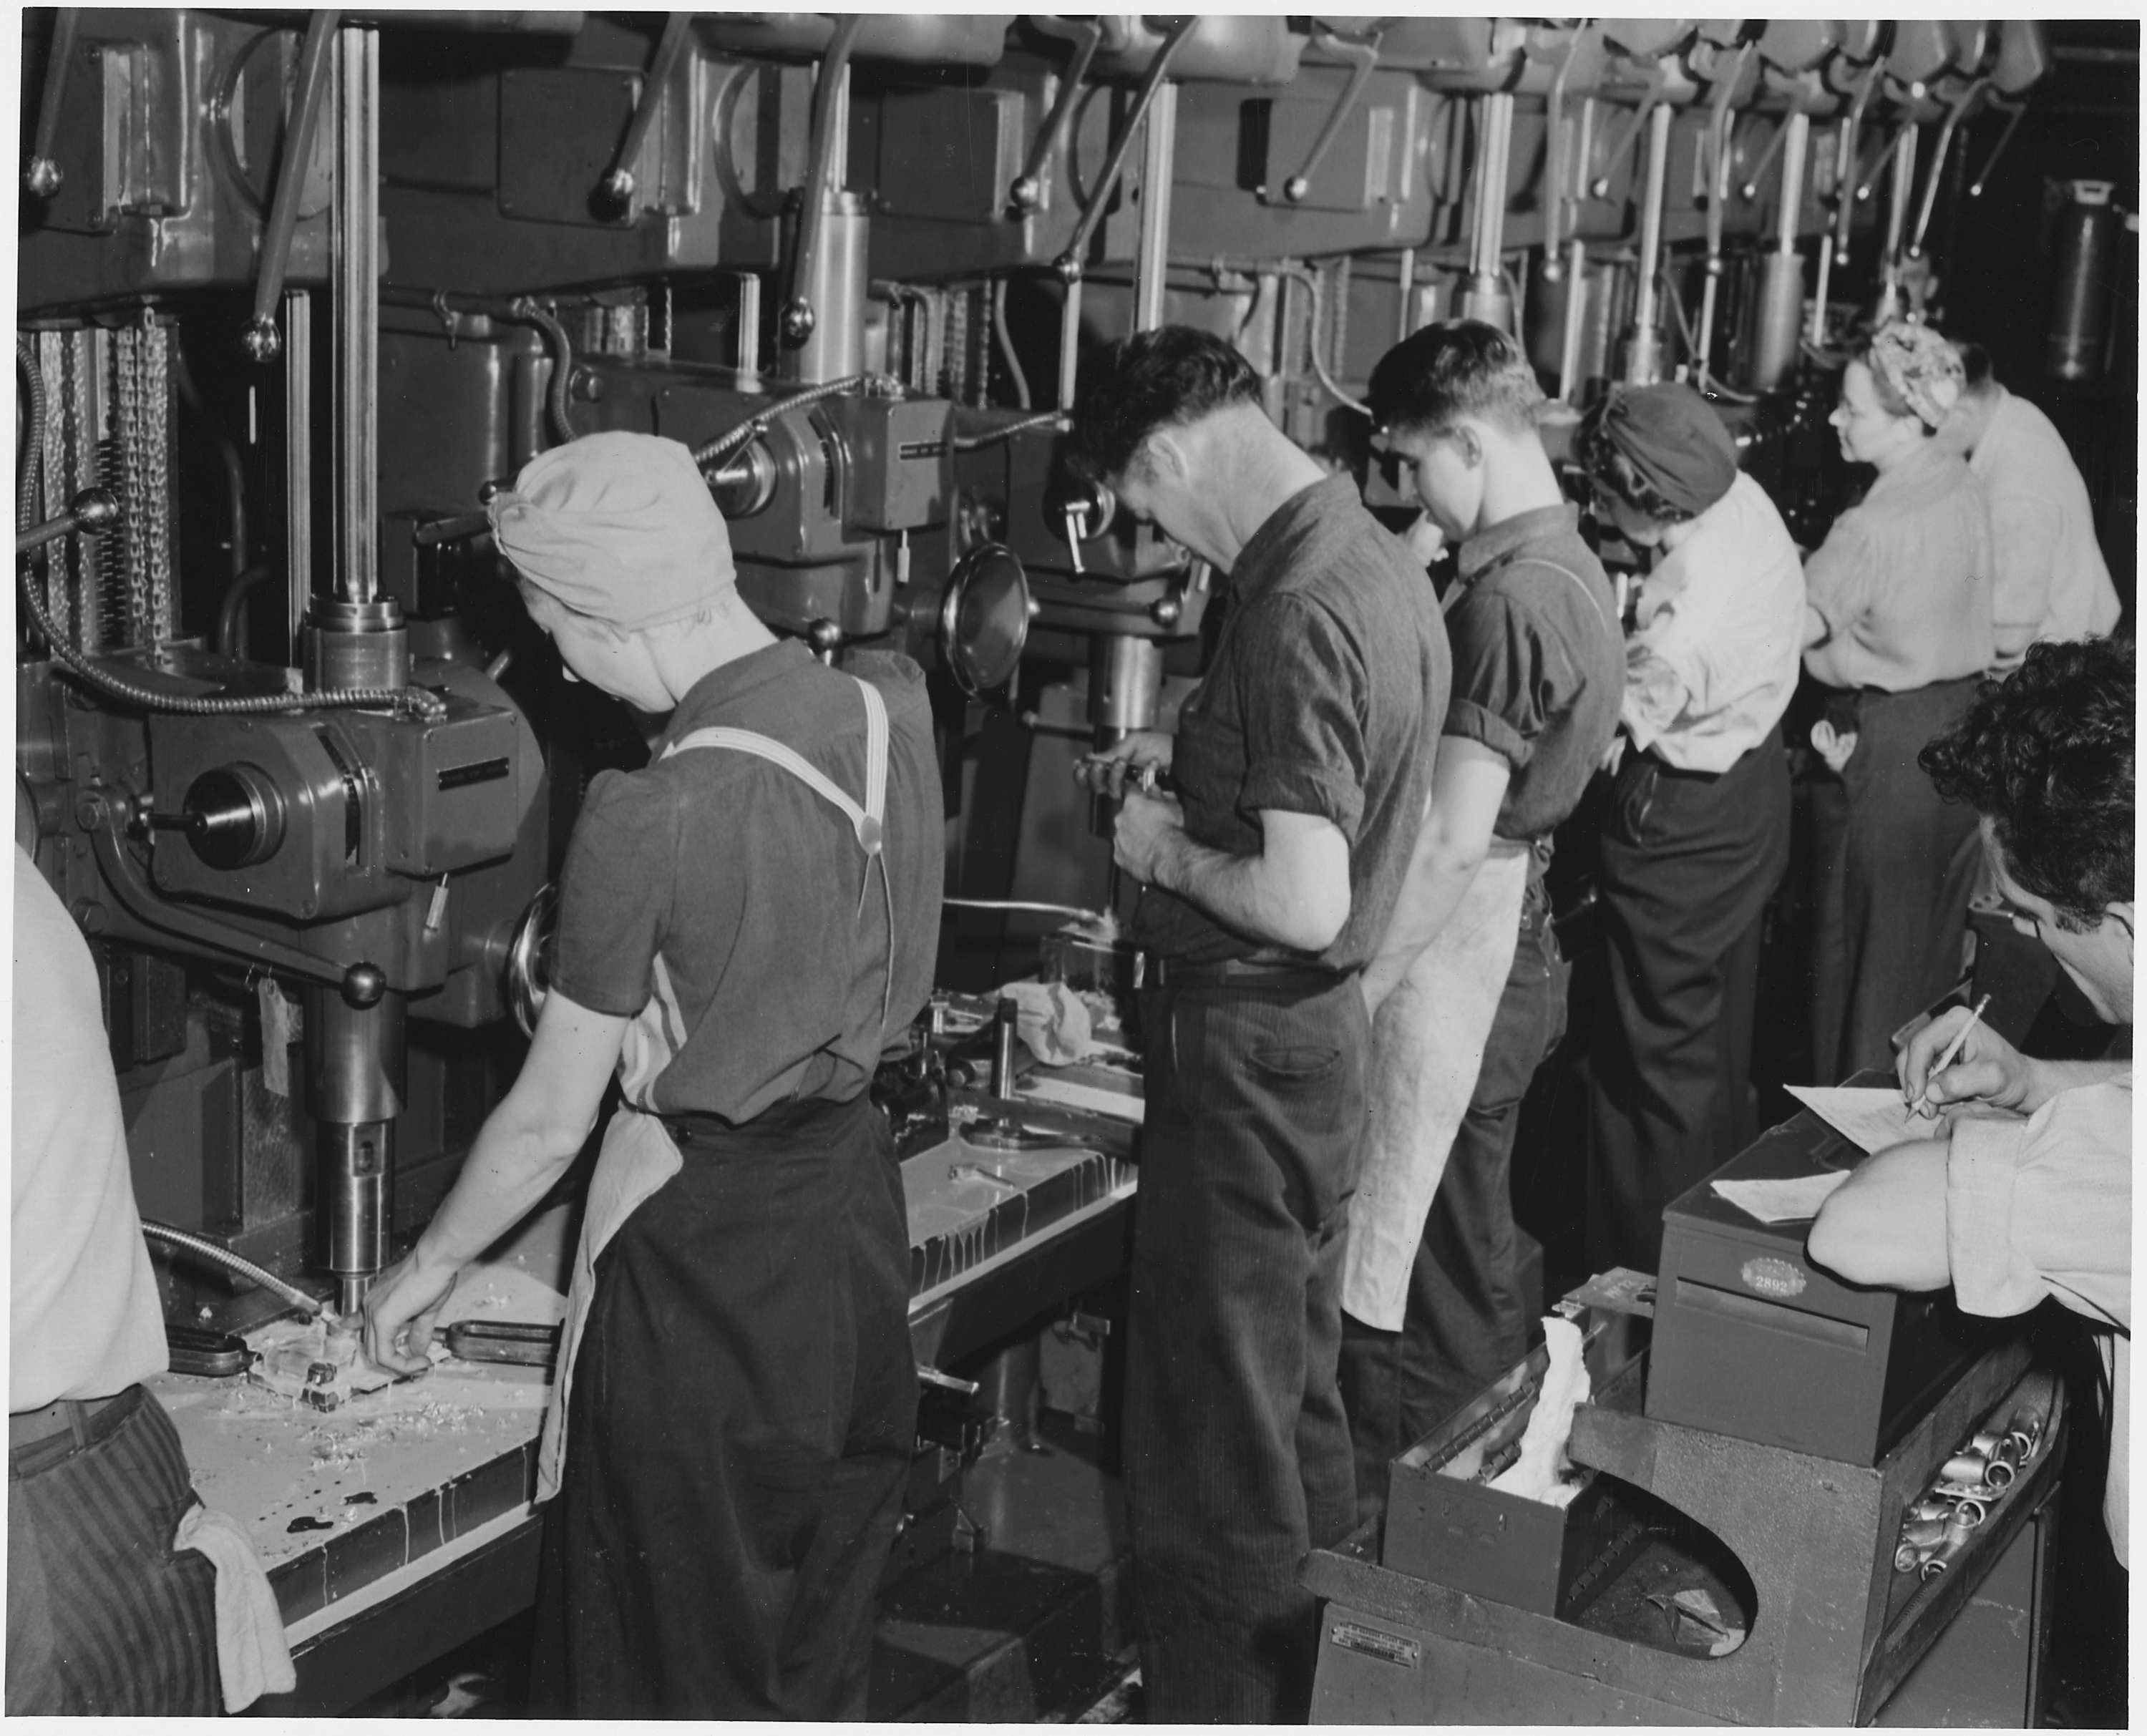 Both men and women man the machines which are turning out parts for America's bomber planes at Willow Run, Mich. - NARA - 195476